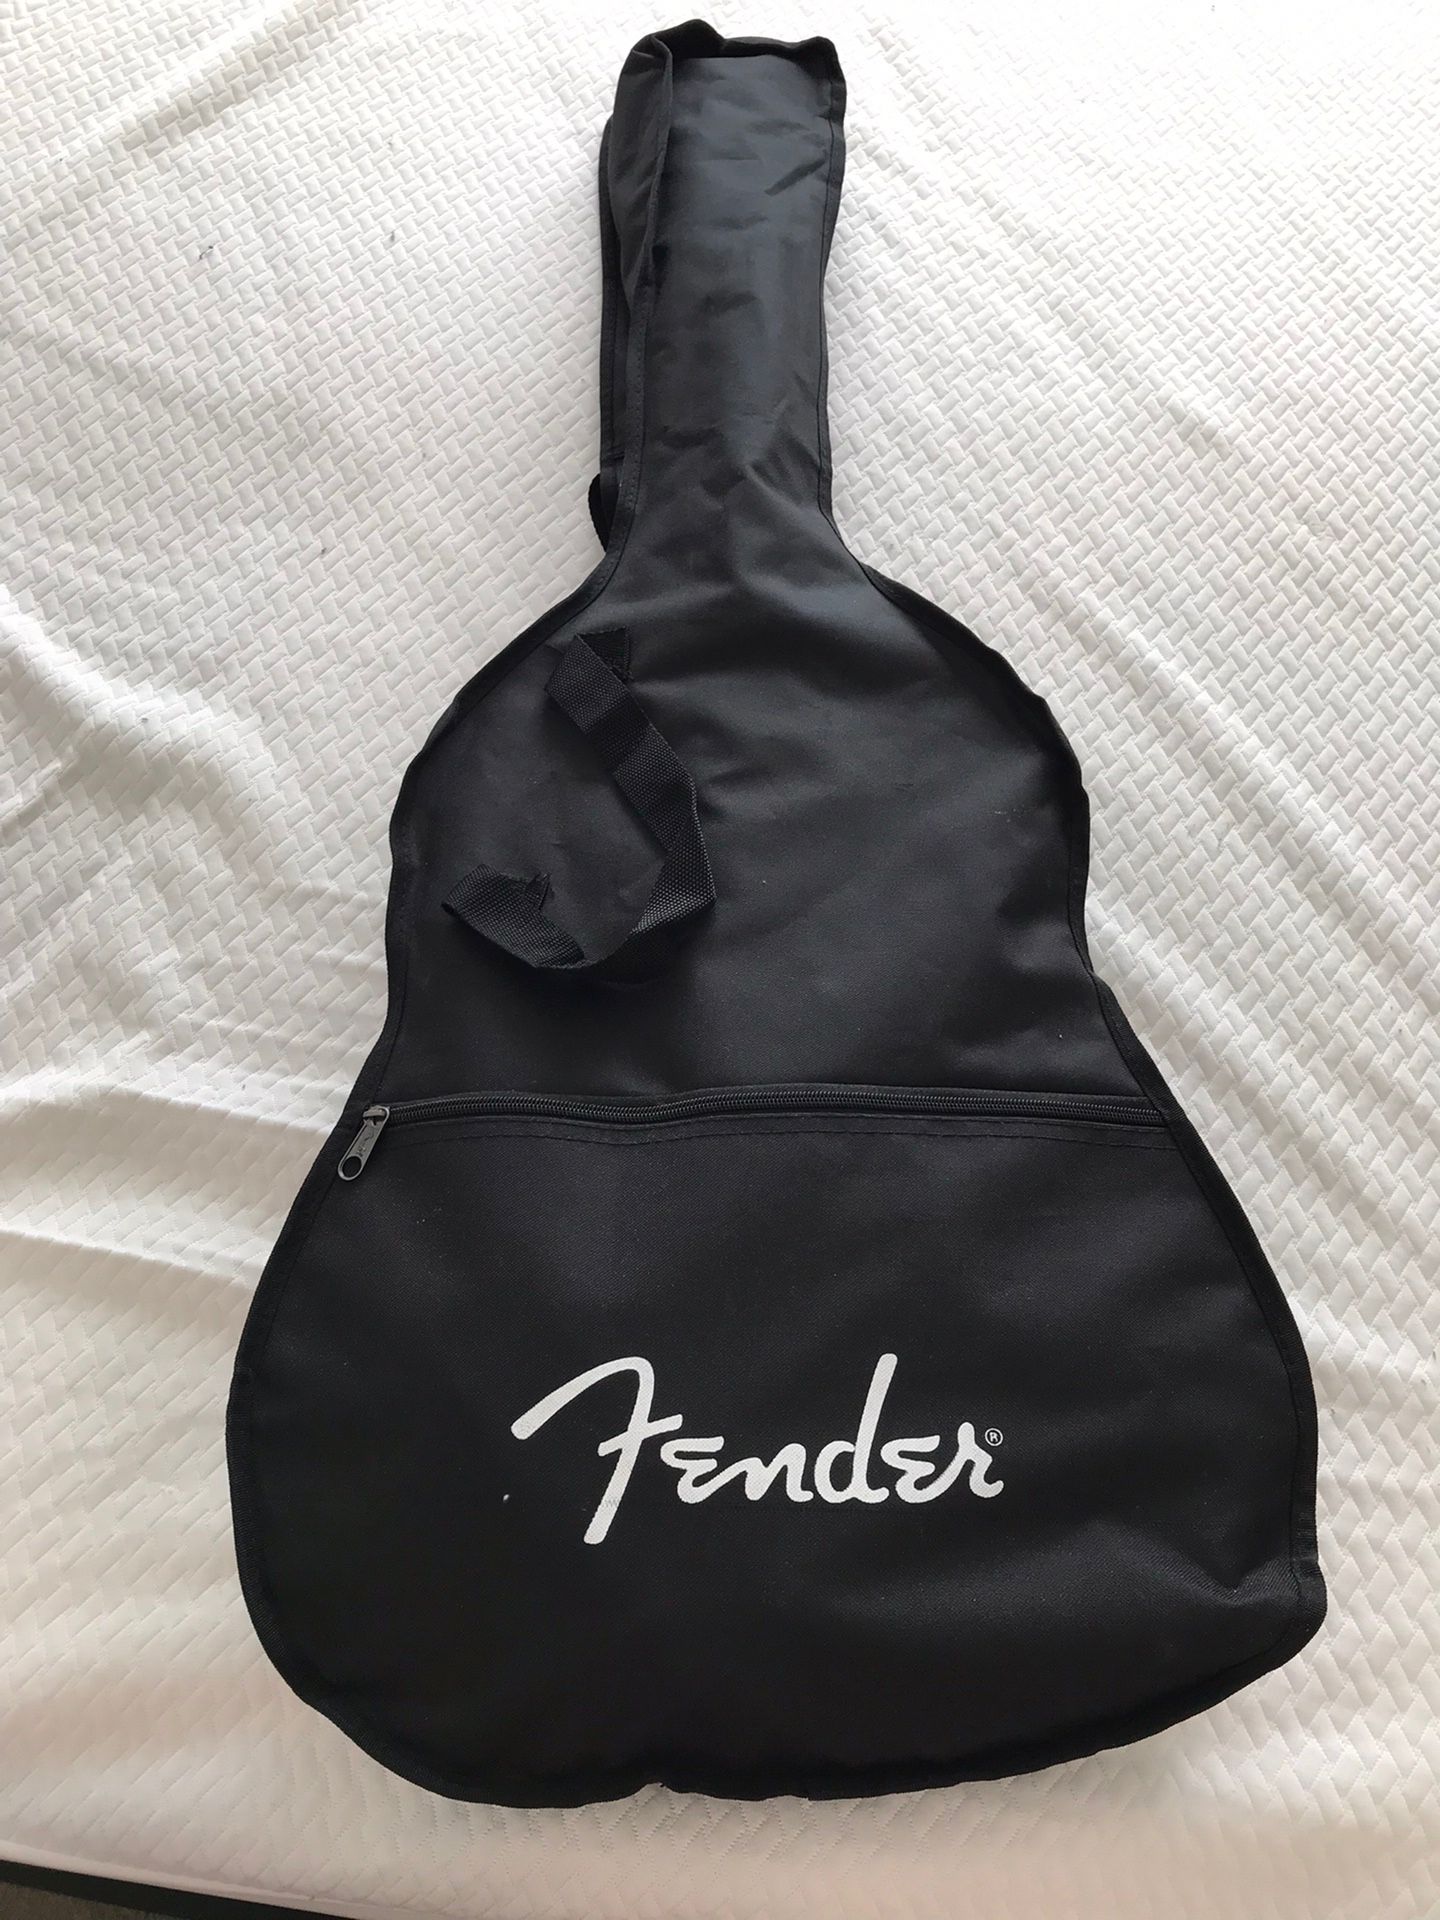 New Fender Guitar And Accessories 